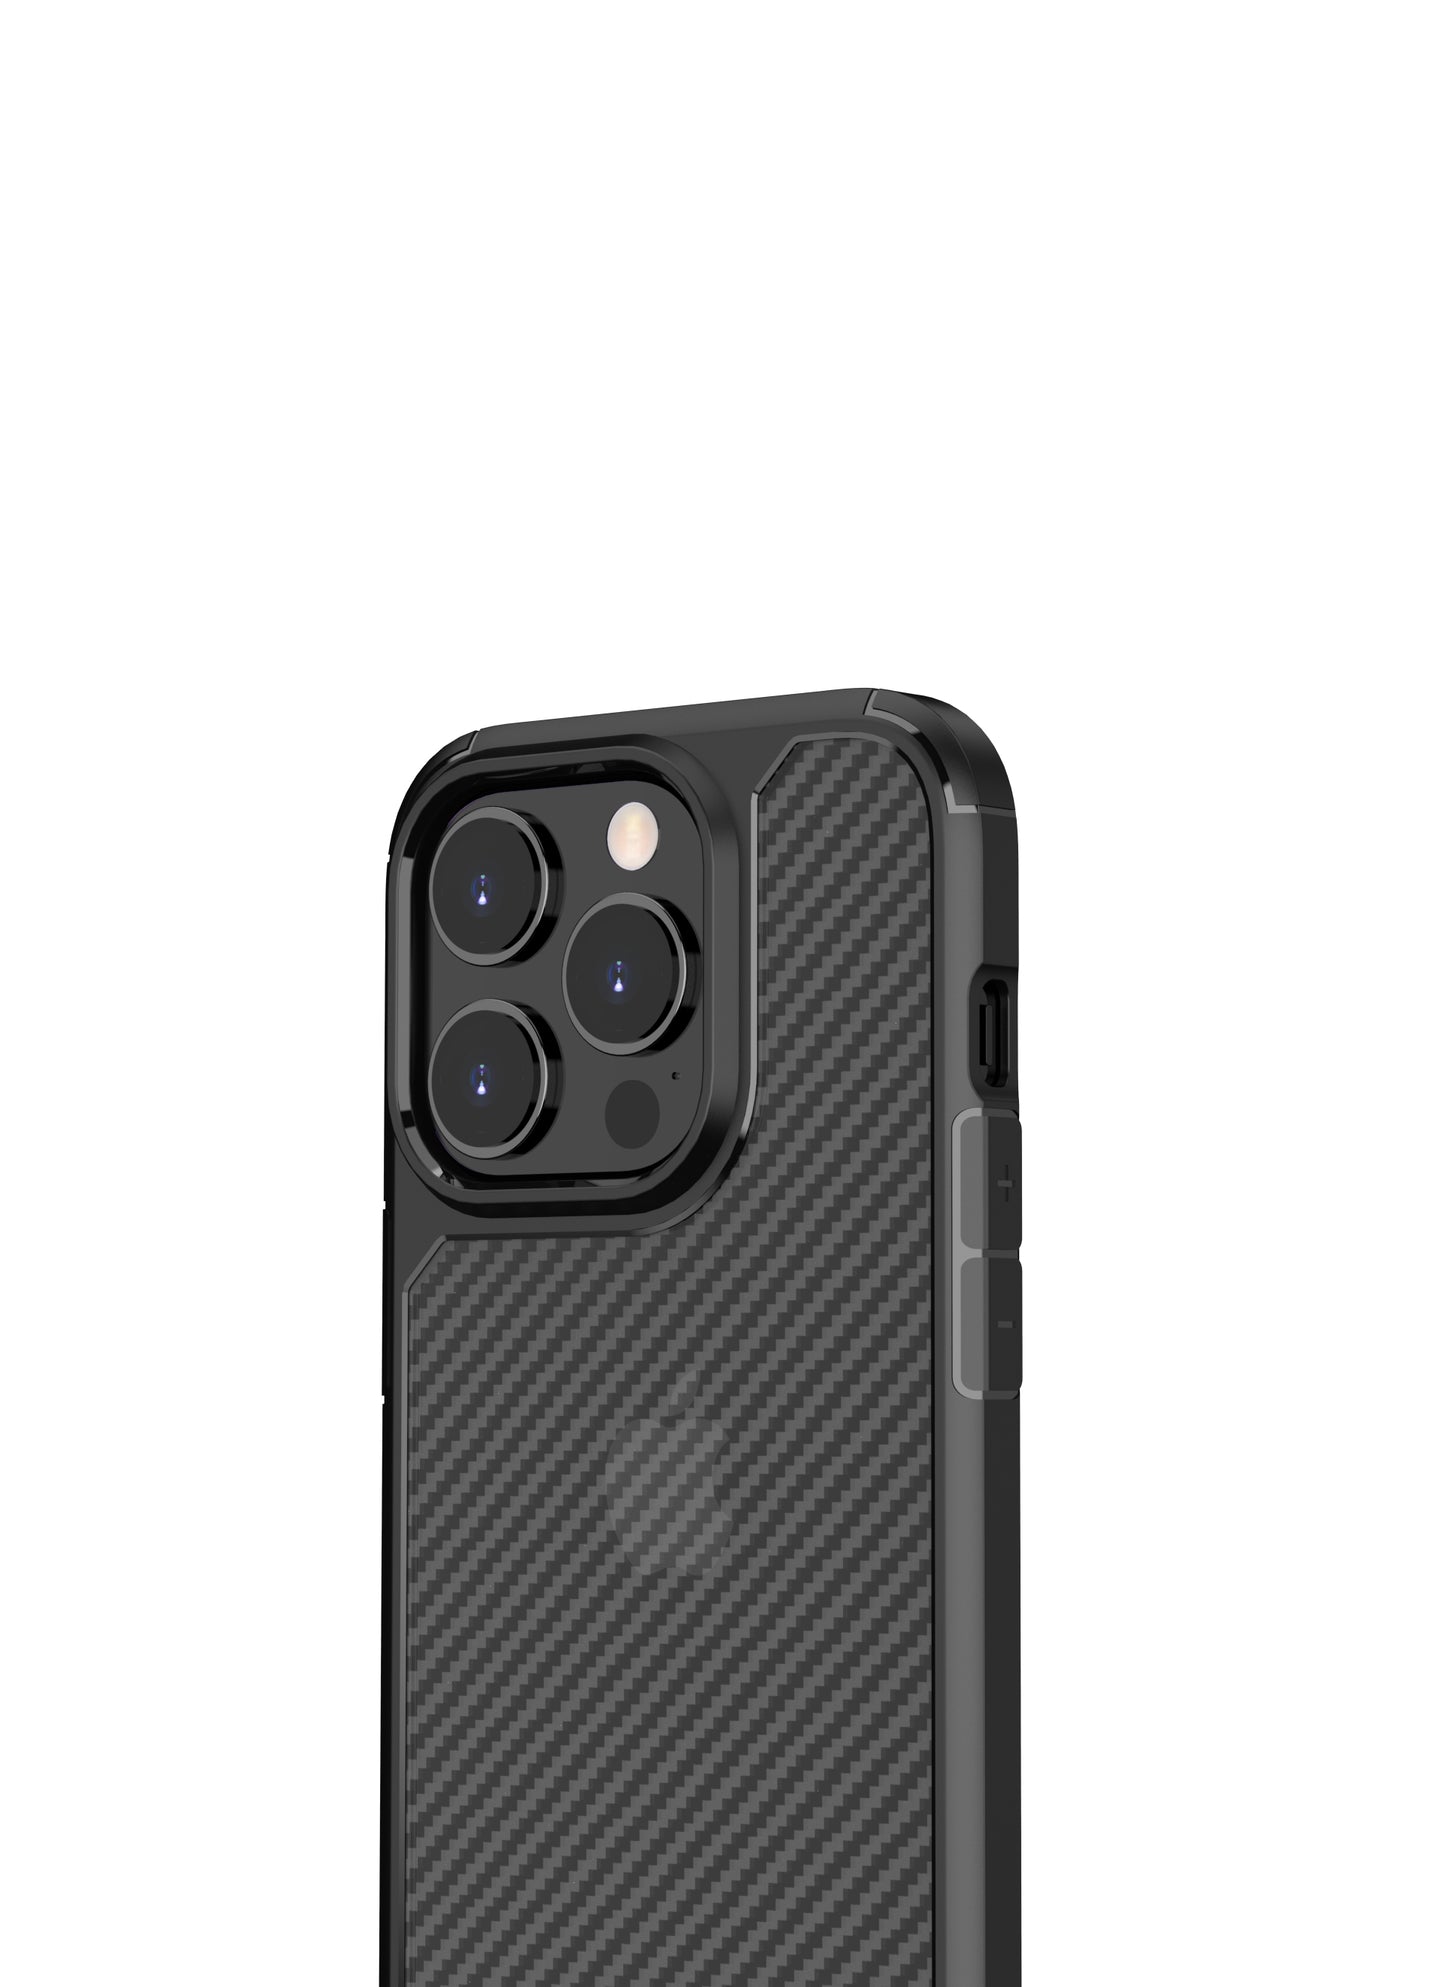 semi-transparent frosted carbon fiber texture hard protection shatter-resistant phone case for iphone 11 pro max